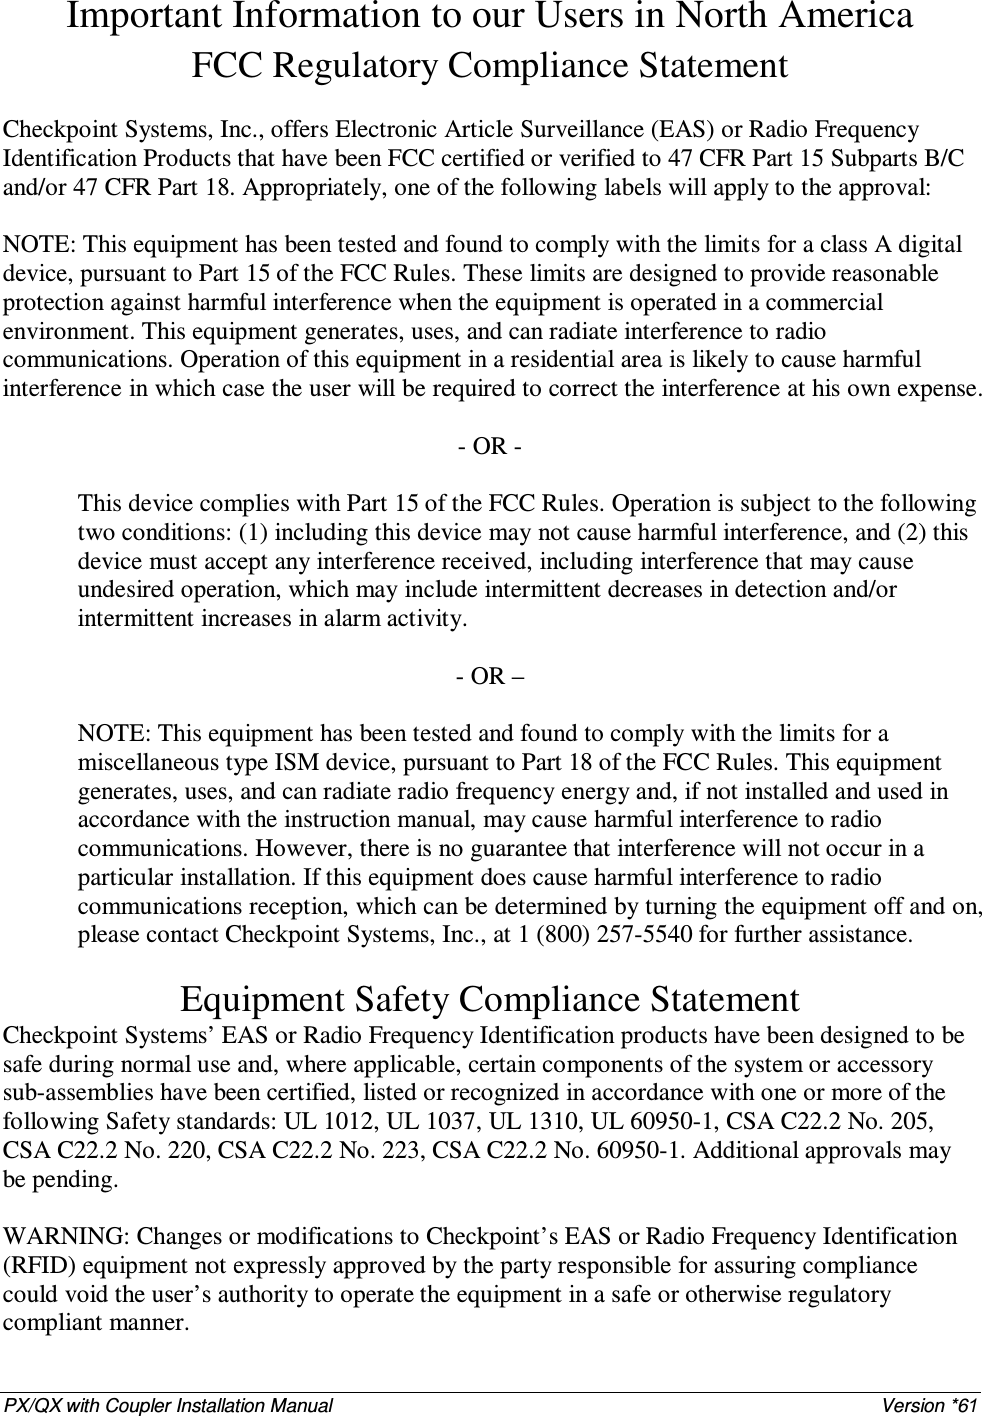 PX/QX with Coupler Installation Manual    Version *61 Important Information to our Users in North America FCC Regulatory Compliance Statement  Checkpoint Systems, Inc., offers Electronic Article Surveillance (EAS) or Radio Frequency Identification Products that have been FCC certified or verified to 47 CFR Part 15 Subparts B/C and/or 47 CFR Part 18. Appropriately, one of the following labels will apply to the approval:  NOTE: This equipment has been tested and found to comply with the limits for a class A digital device, pursuant to Part 15 of the FCC Rules. These limits are designed to provide reasonable protection against harmful interference when the equipment is operated in a commercial environment. This equipment generates, uses, and can radiate interference to radio communications. Operation of this equipment in a residential area is likely to cause harmful interference in which case the user will be required to correct the interference at his own expense.  - OR -  This device complies with Part 15 of the FCC Rules. Operation is subject to the following two conditions: (1) including this device may not cause harmful interference, and (2) this device must accept any interference received, including interference that may cause undesired operation, which may include intermittent decreases in detection and/or intermittent increases in alarm activity.   - OR –  NOTE: This equipment has been tested and found to comply with the limits for a miscellaneous type ISM device, pursuant to Part 18 of the FCC Rules. This equipment generates, uses, and can radiate radio frequency energy and, if not installed and used in accordance with the instruction manual, may cause harmful interference to radio communications. However, there is no guarantee that interference will not occur in a particular installation. If this equipment does cause harmful interference to radio communications reception, which can be determined by turning the equipment off and on, please contact Checkpoint Systems, Inc., at 1 (800) 257-5540 for further assistance.  Equipment Safety Compliance Statement Checkpoint Systems’ EAS or Radio Frequency Identification products have been designed to be safe during normal use and, where applicable, certain components of the system or accessory sub-assemblies have been certified, listed or recognized in accordance with one or more of the following Safety standards: UL 1012, UL 1037, UL 1310, UL 60950-1, CSA C22.2 No. 205, CSA C22.2 No. 220, CSA C22.2 No. 223, CSA C22.2 No. 60950-1. Additional approvals may be pending.  WARNING: Changes or modifications to Checkpoint’s EAS or Radio Frequency Identification (RFID) equipment not expressly approved by the party responsible for assuring compliance could void the user’s authority to operate the equipment in a safe or otherwise regulatory compliant manner. 